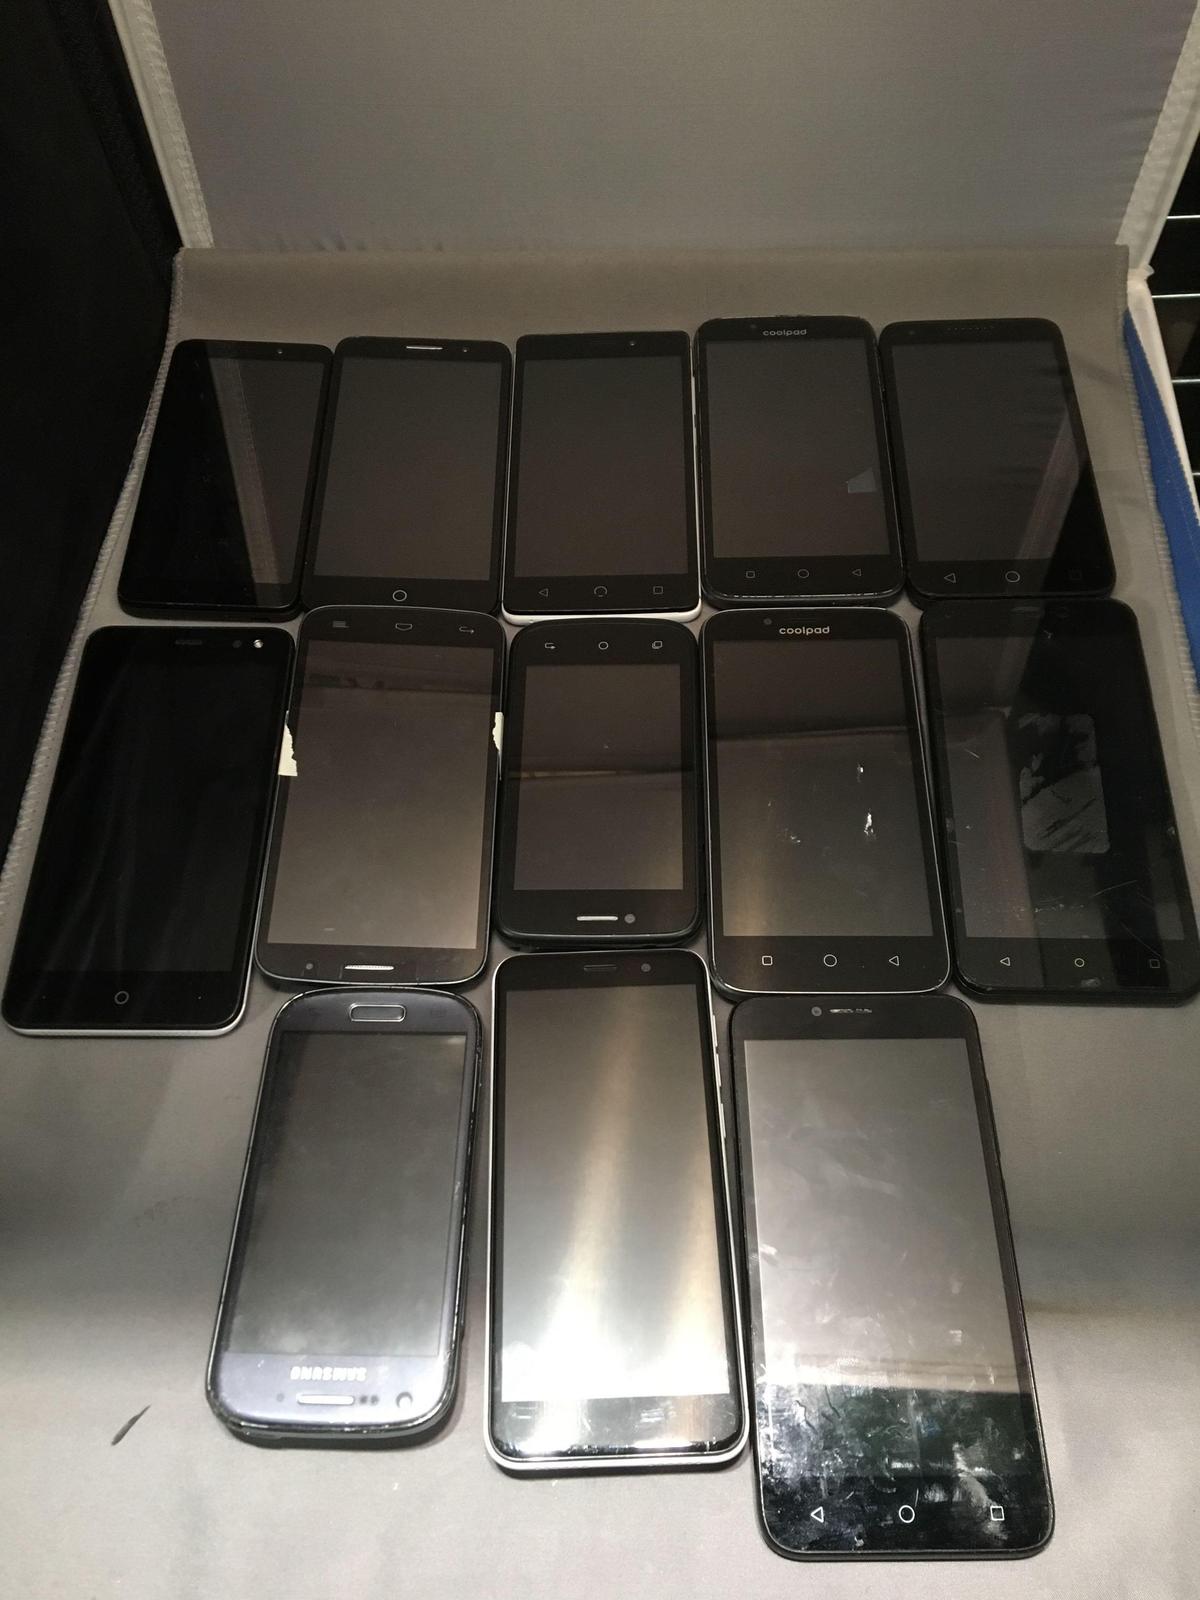 13 Mixed Bulk Purchased Cell Phones